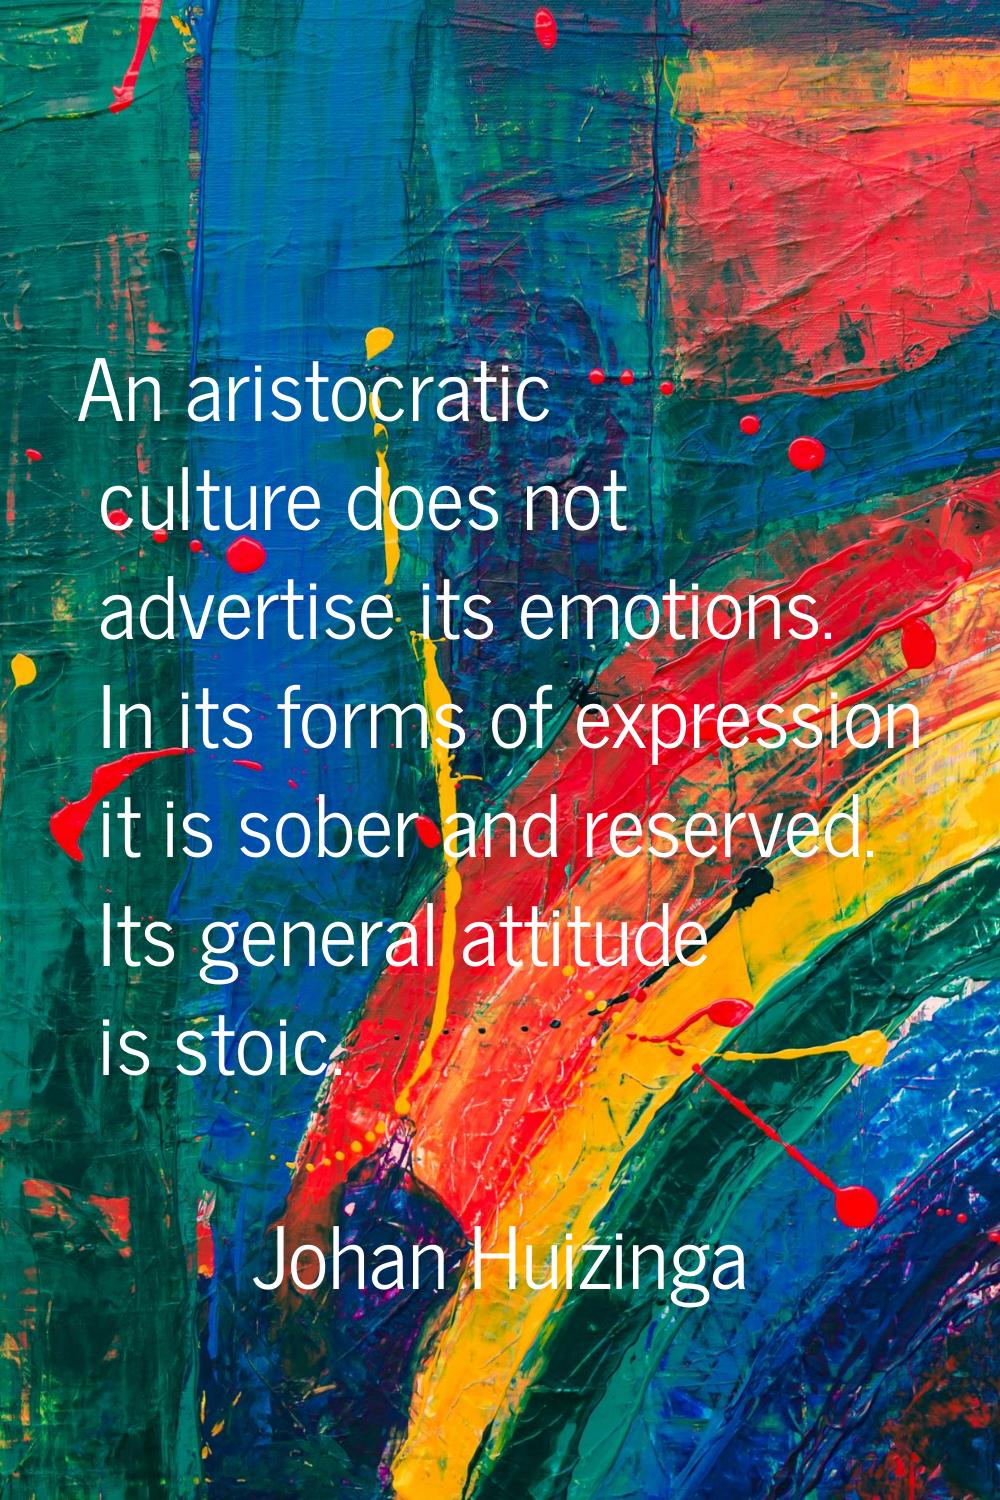 An aristocratic culture does not advertise its emotions. In its forms of expression it is sober and